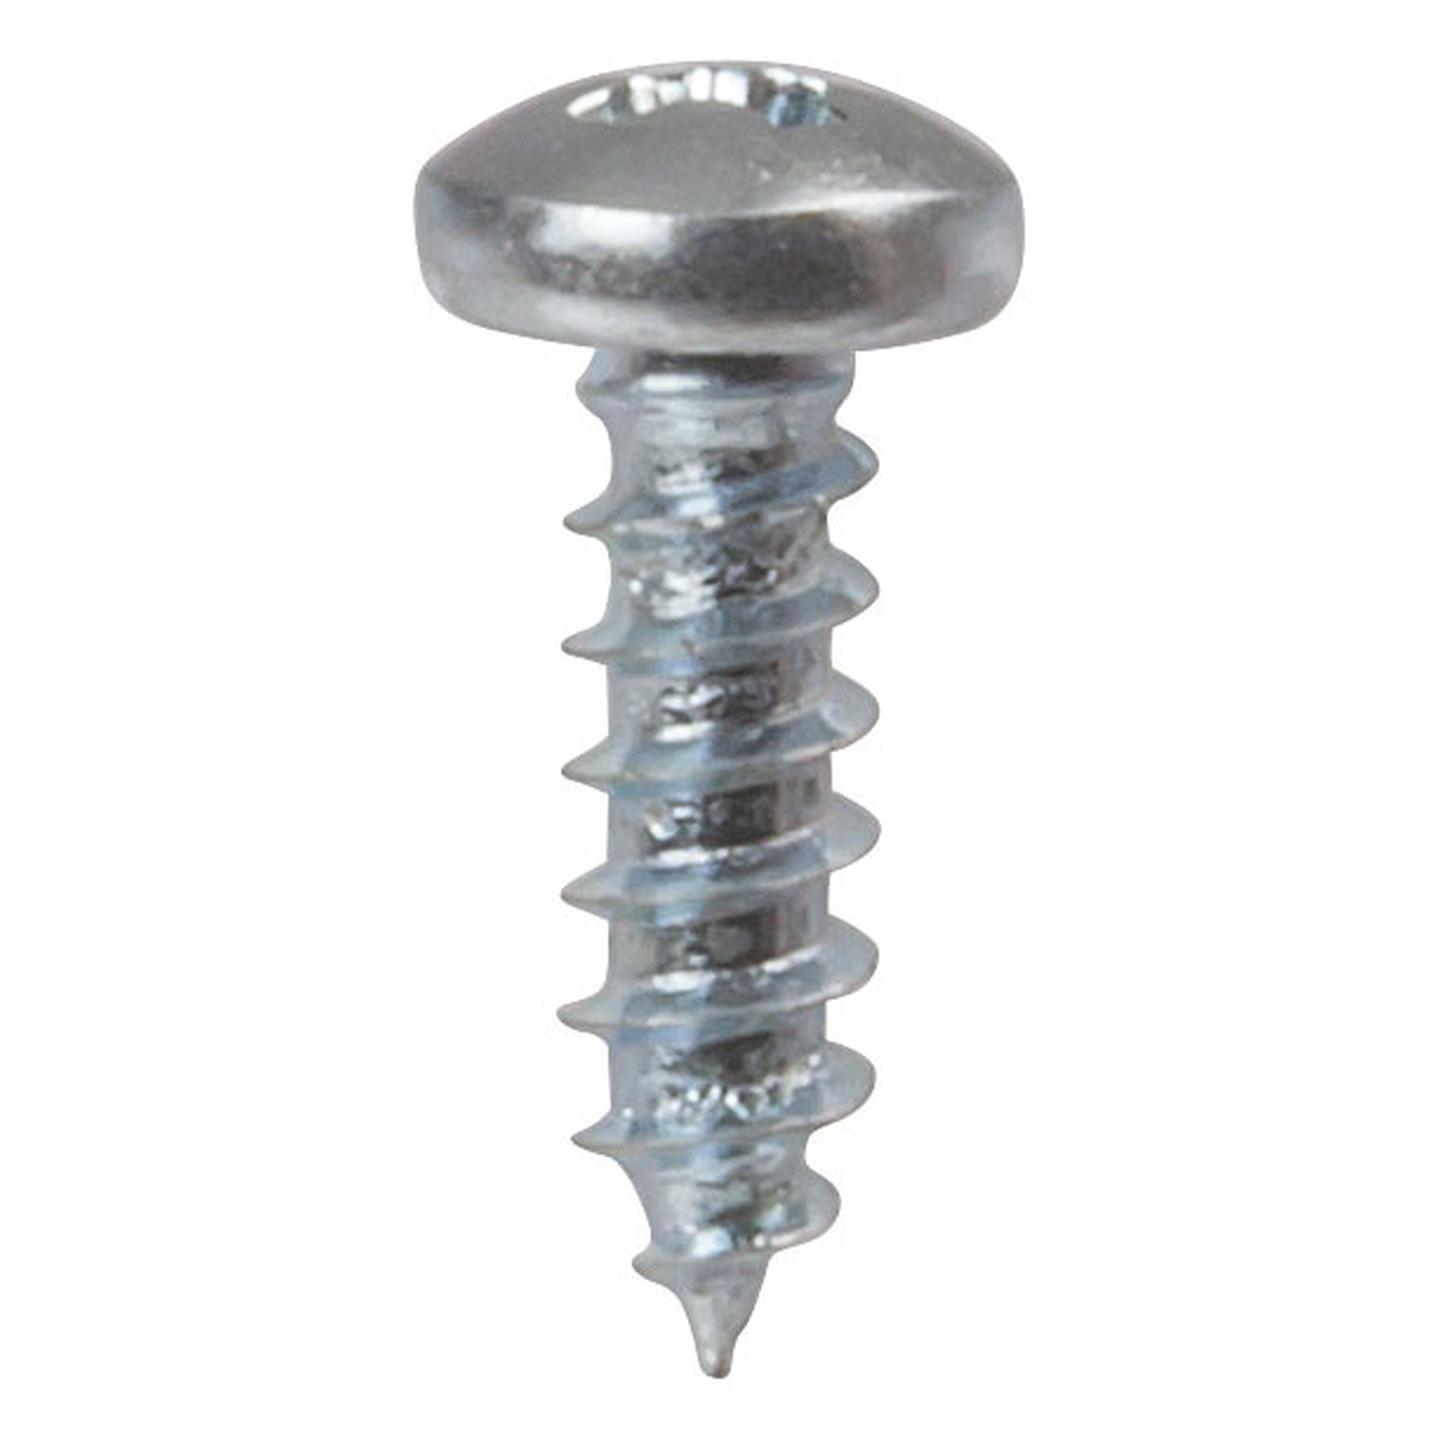 No.4 x 9mm Steel Self Tapping Screws - Pack of 25